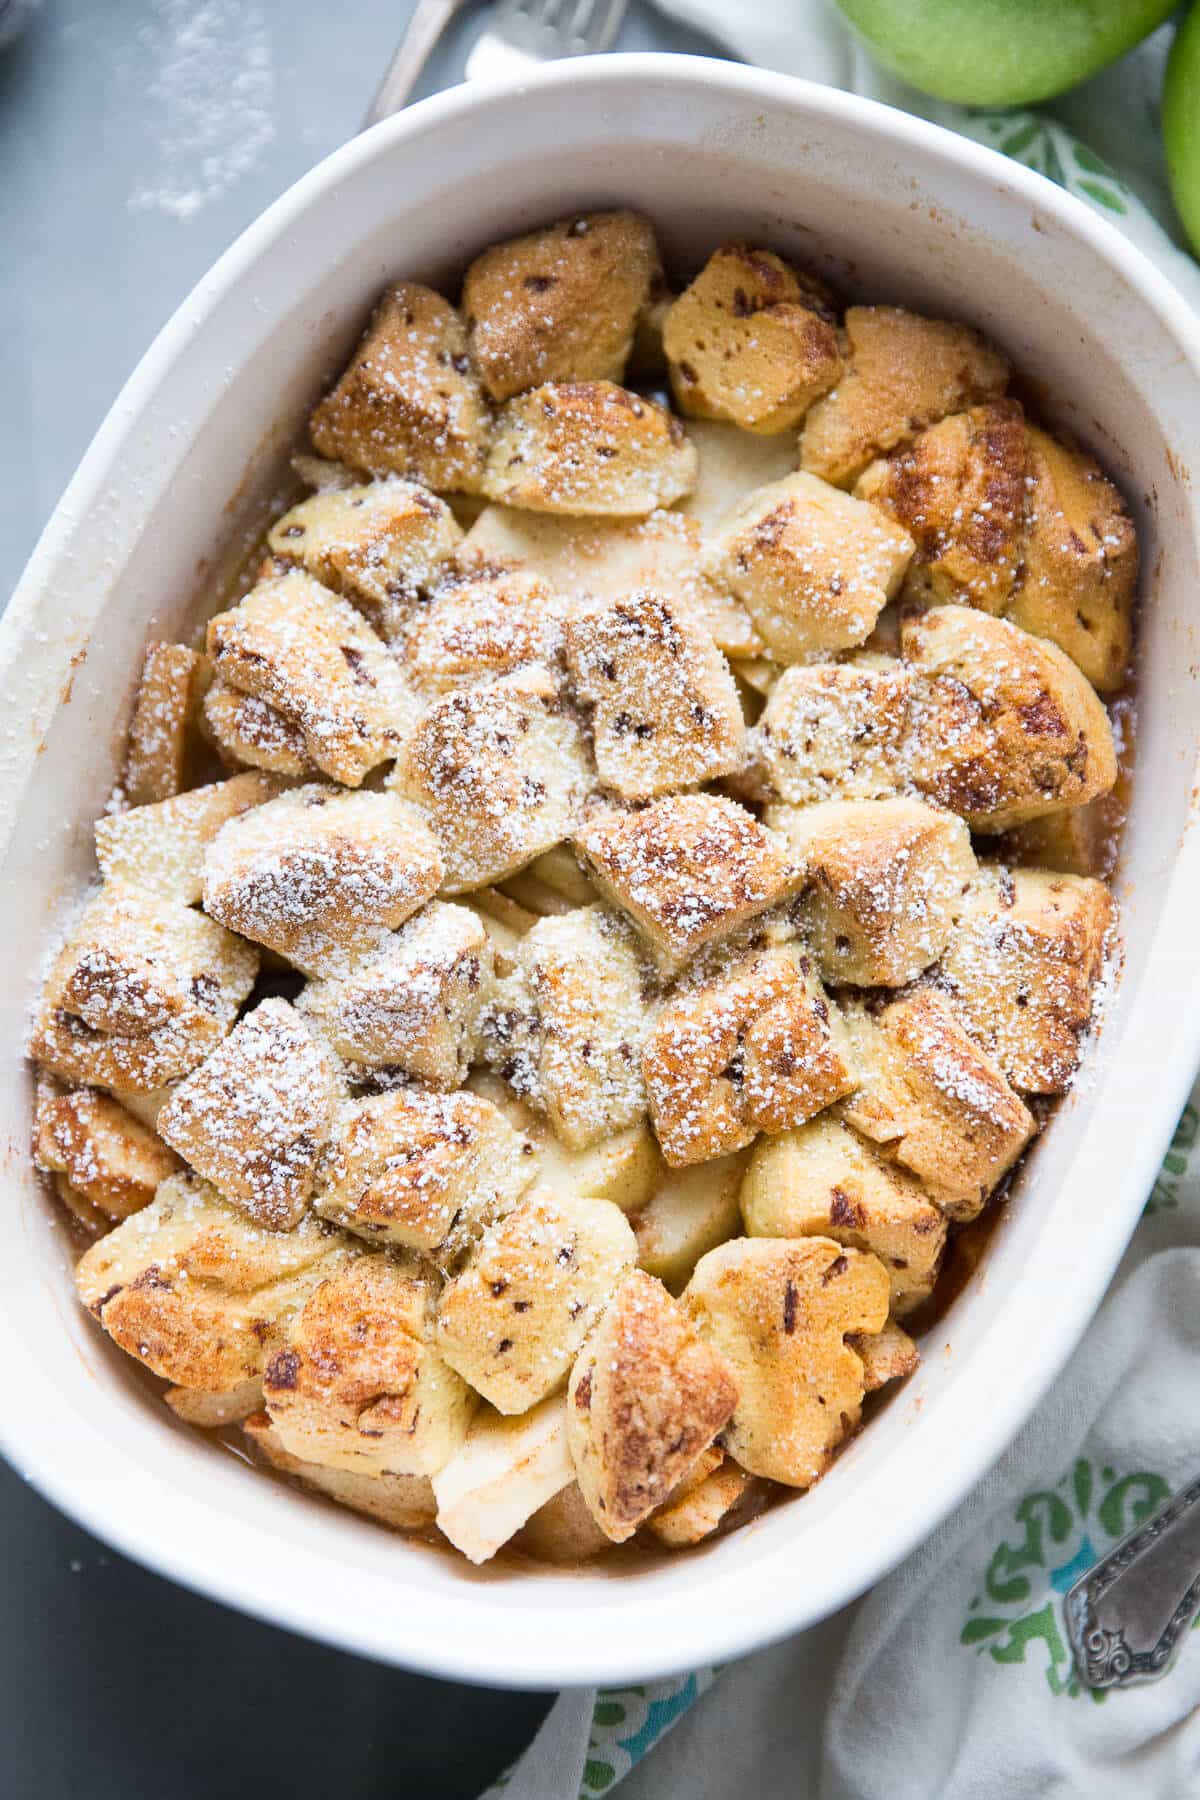 This easy apple cobbler recipe is fabulous! Tart apples, cinnamon, and sugar make the perfect apple base.  Store bought cinnamon rolls make an unforgettably delicious topping!